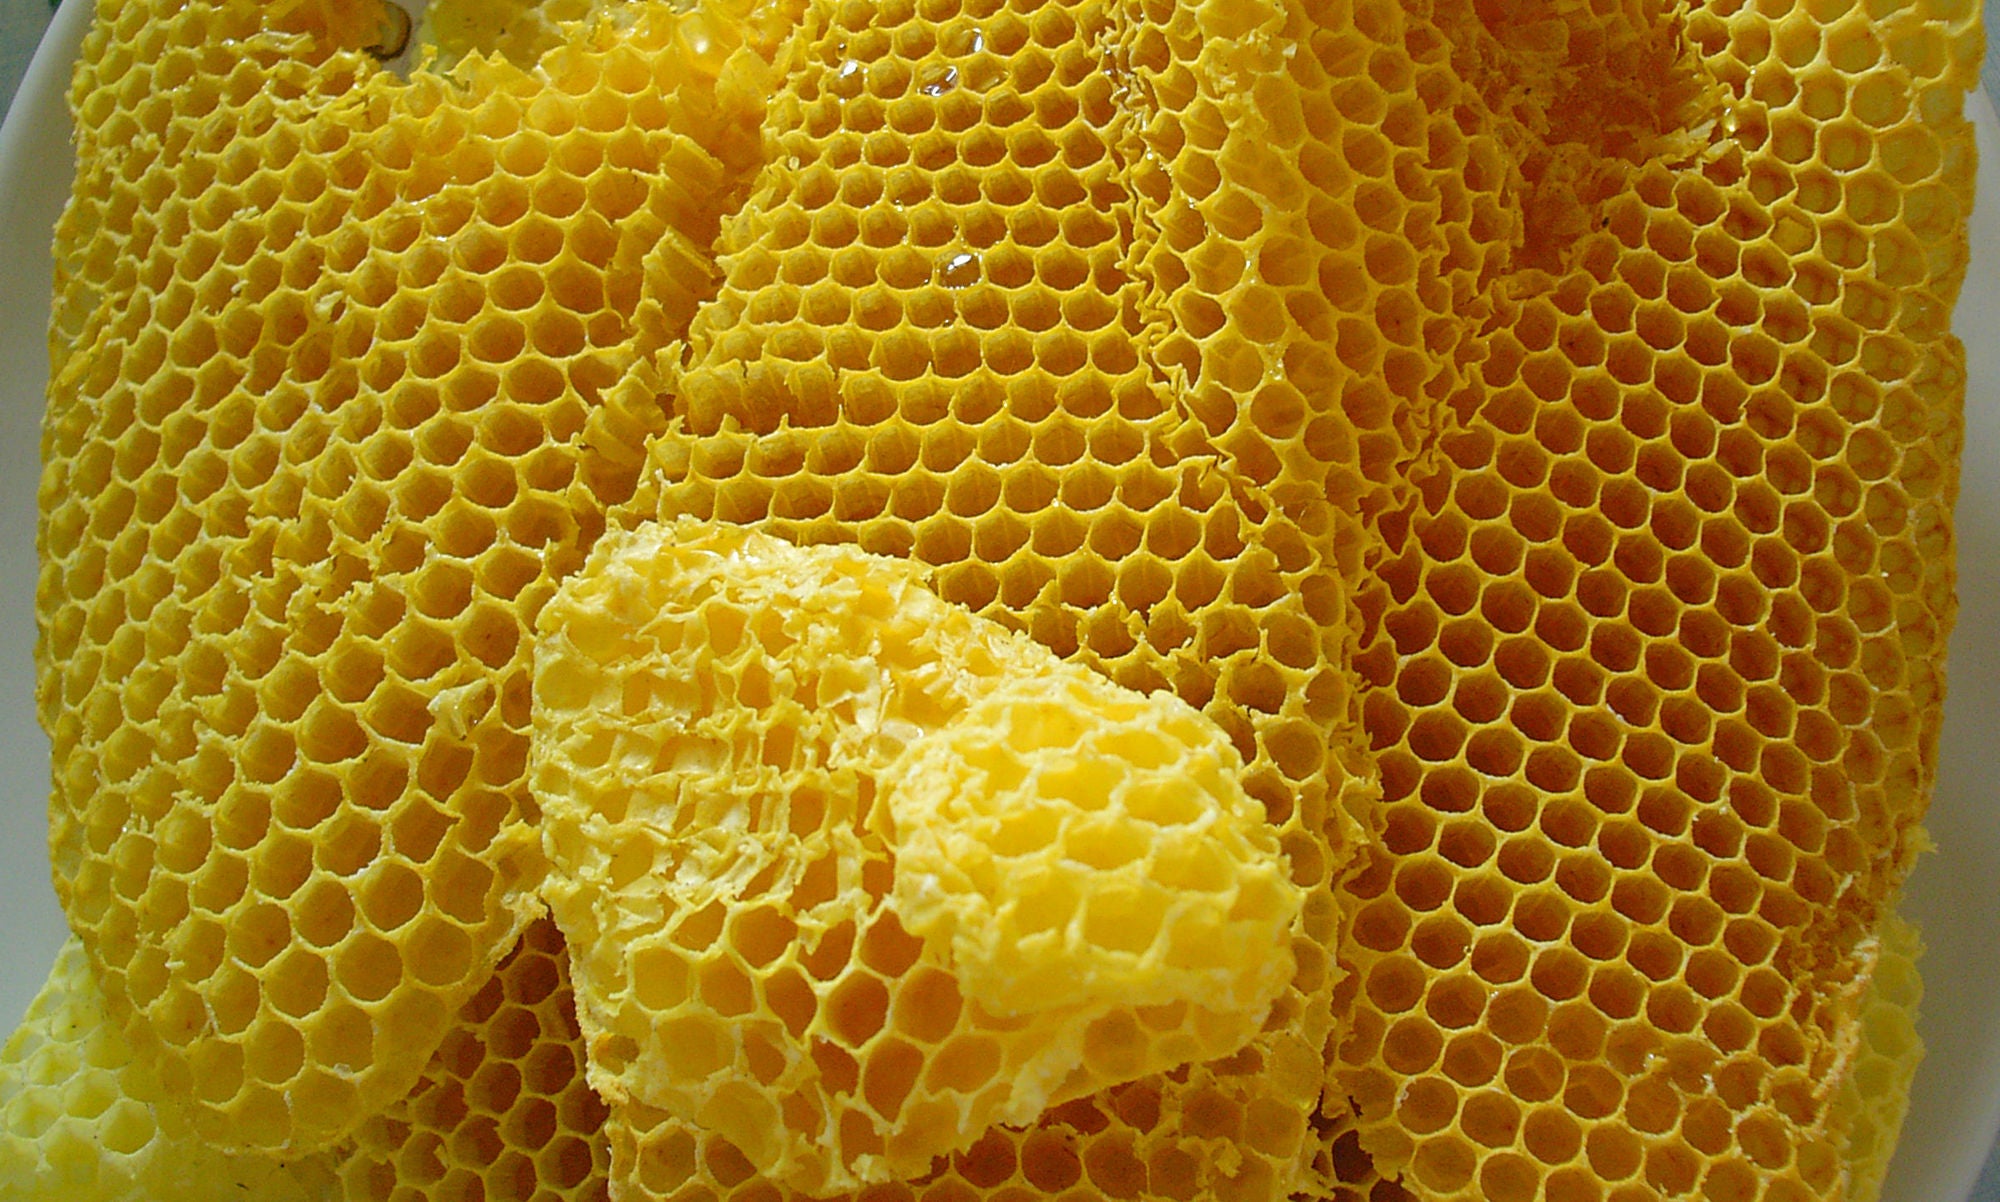 Minding your beeswax